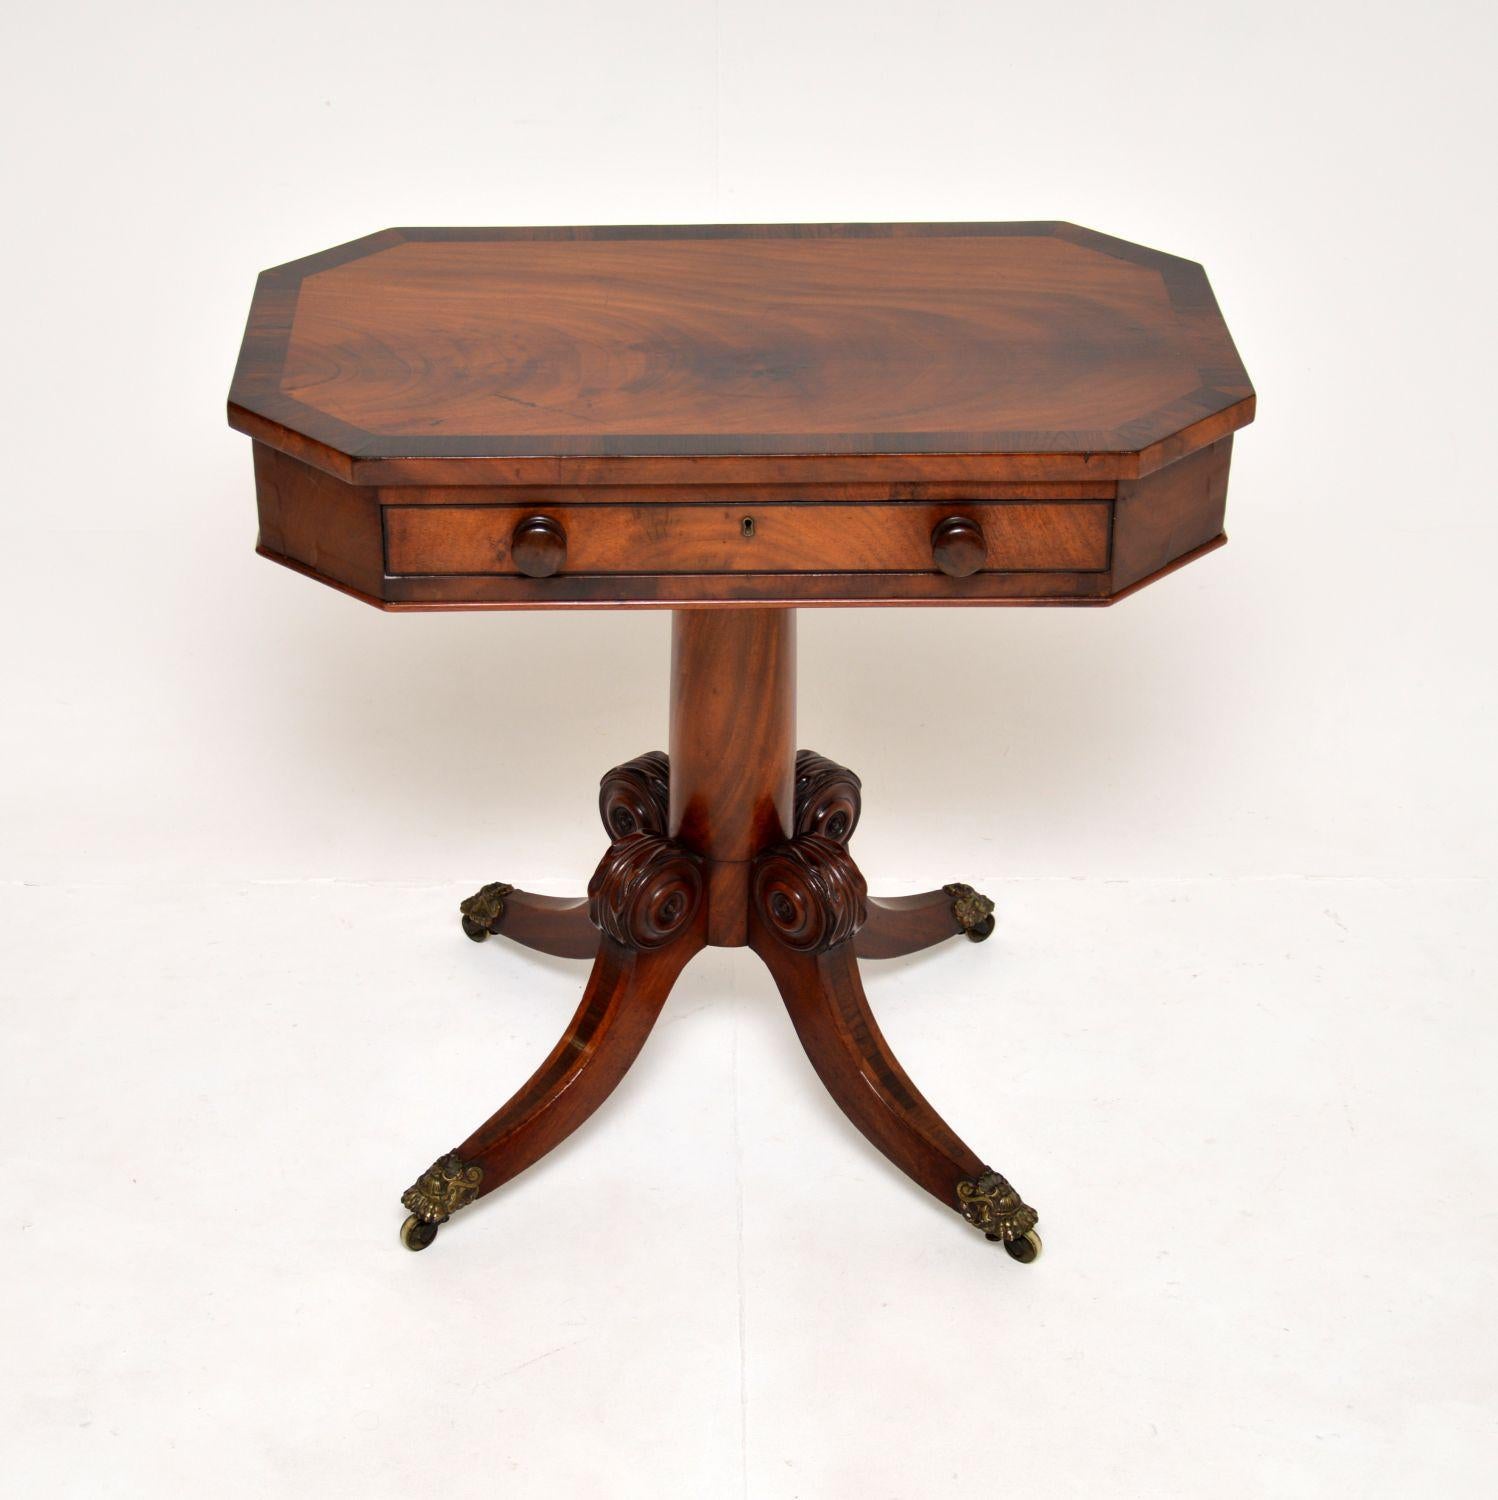 A fantastic antique regency period inlaid side table. This was made in England, it dates from around 1815-1830.

It is of superb quality and is a very useful size. There is a single drawer in the top which has fine, hand cut dovetailed joints and